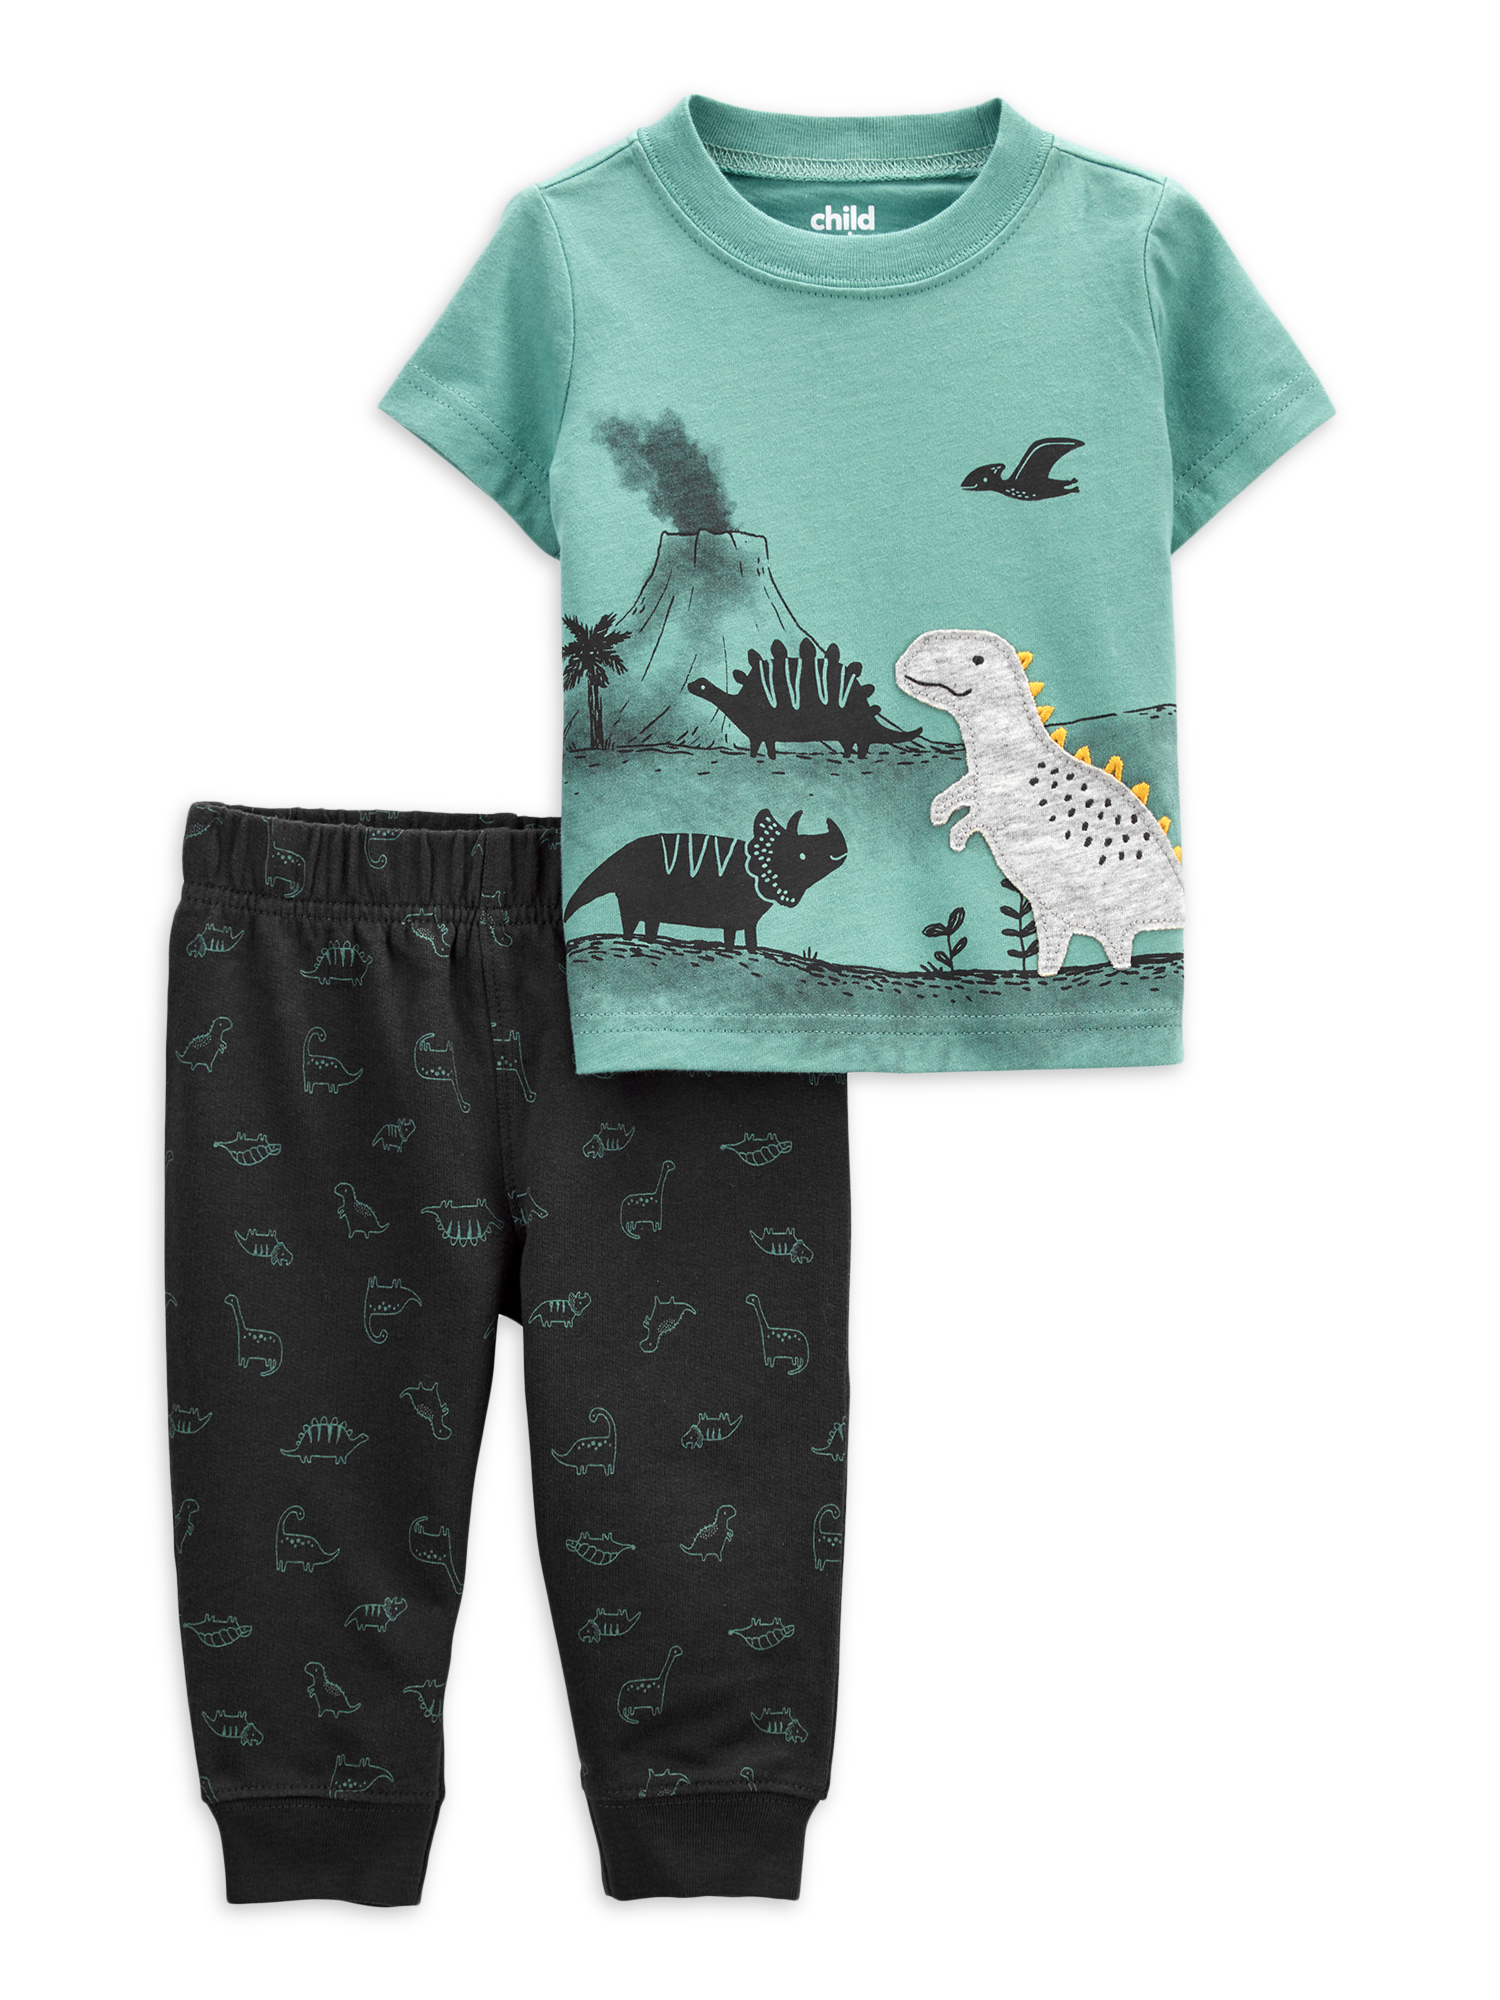 Carter's Child of Mine Toddler Boy Short-Sleeve T-shirt & Jogger Pant Outfit Set, 2-Piece, 2T-5T - image 1 of 2